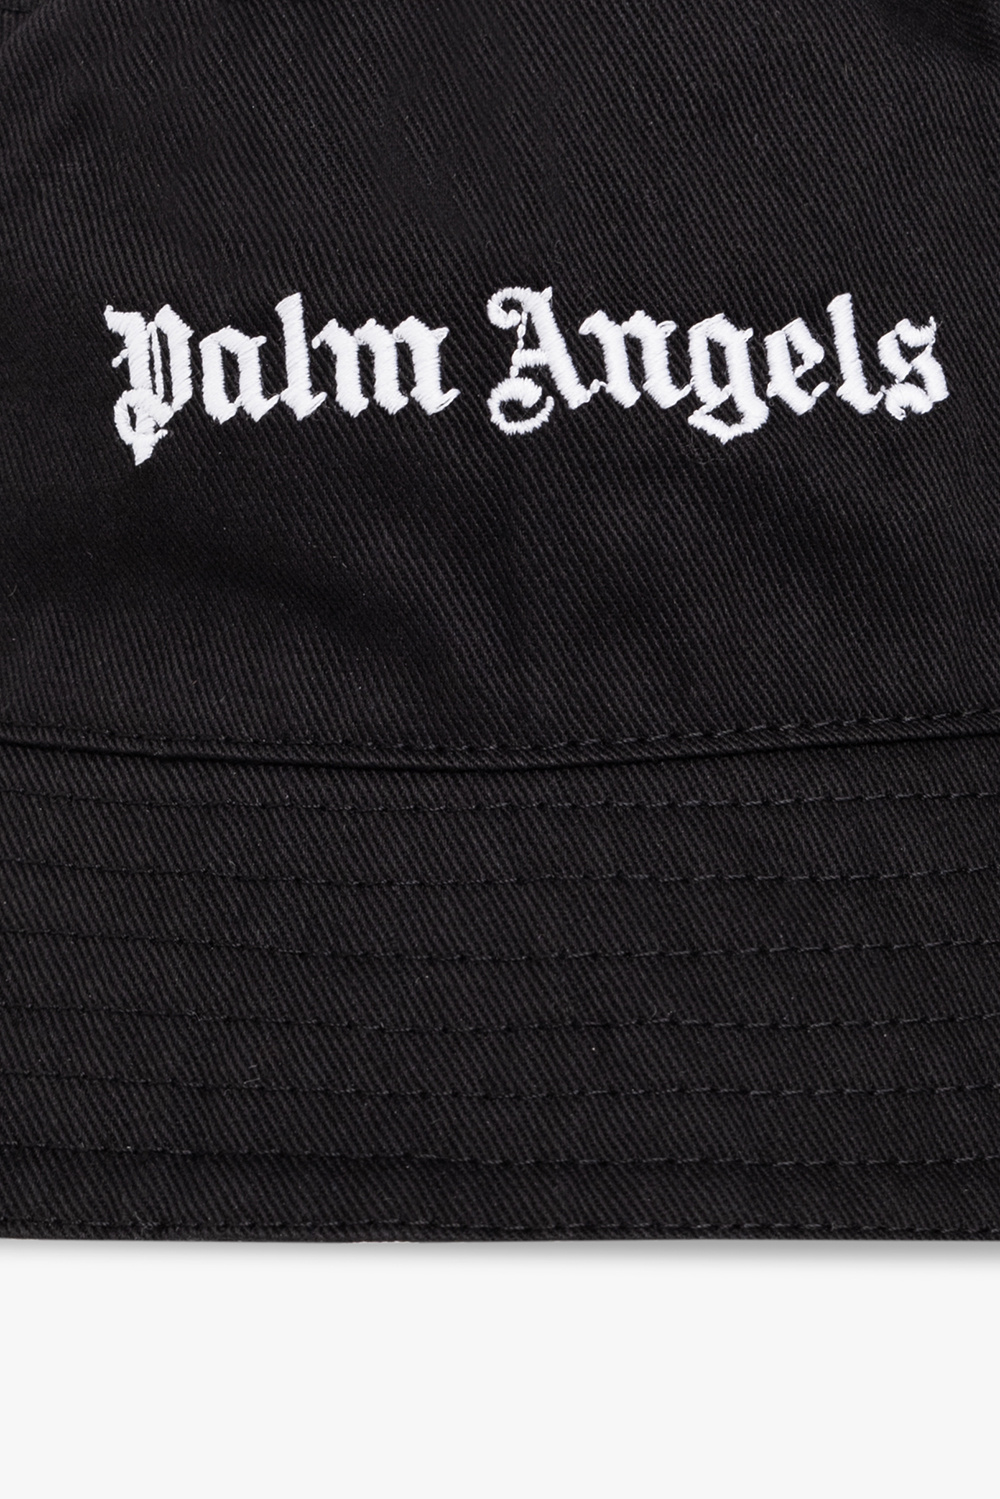 Palm Angels Kids Bucket clothing hat with logo